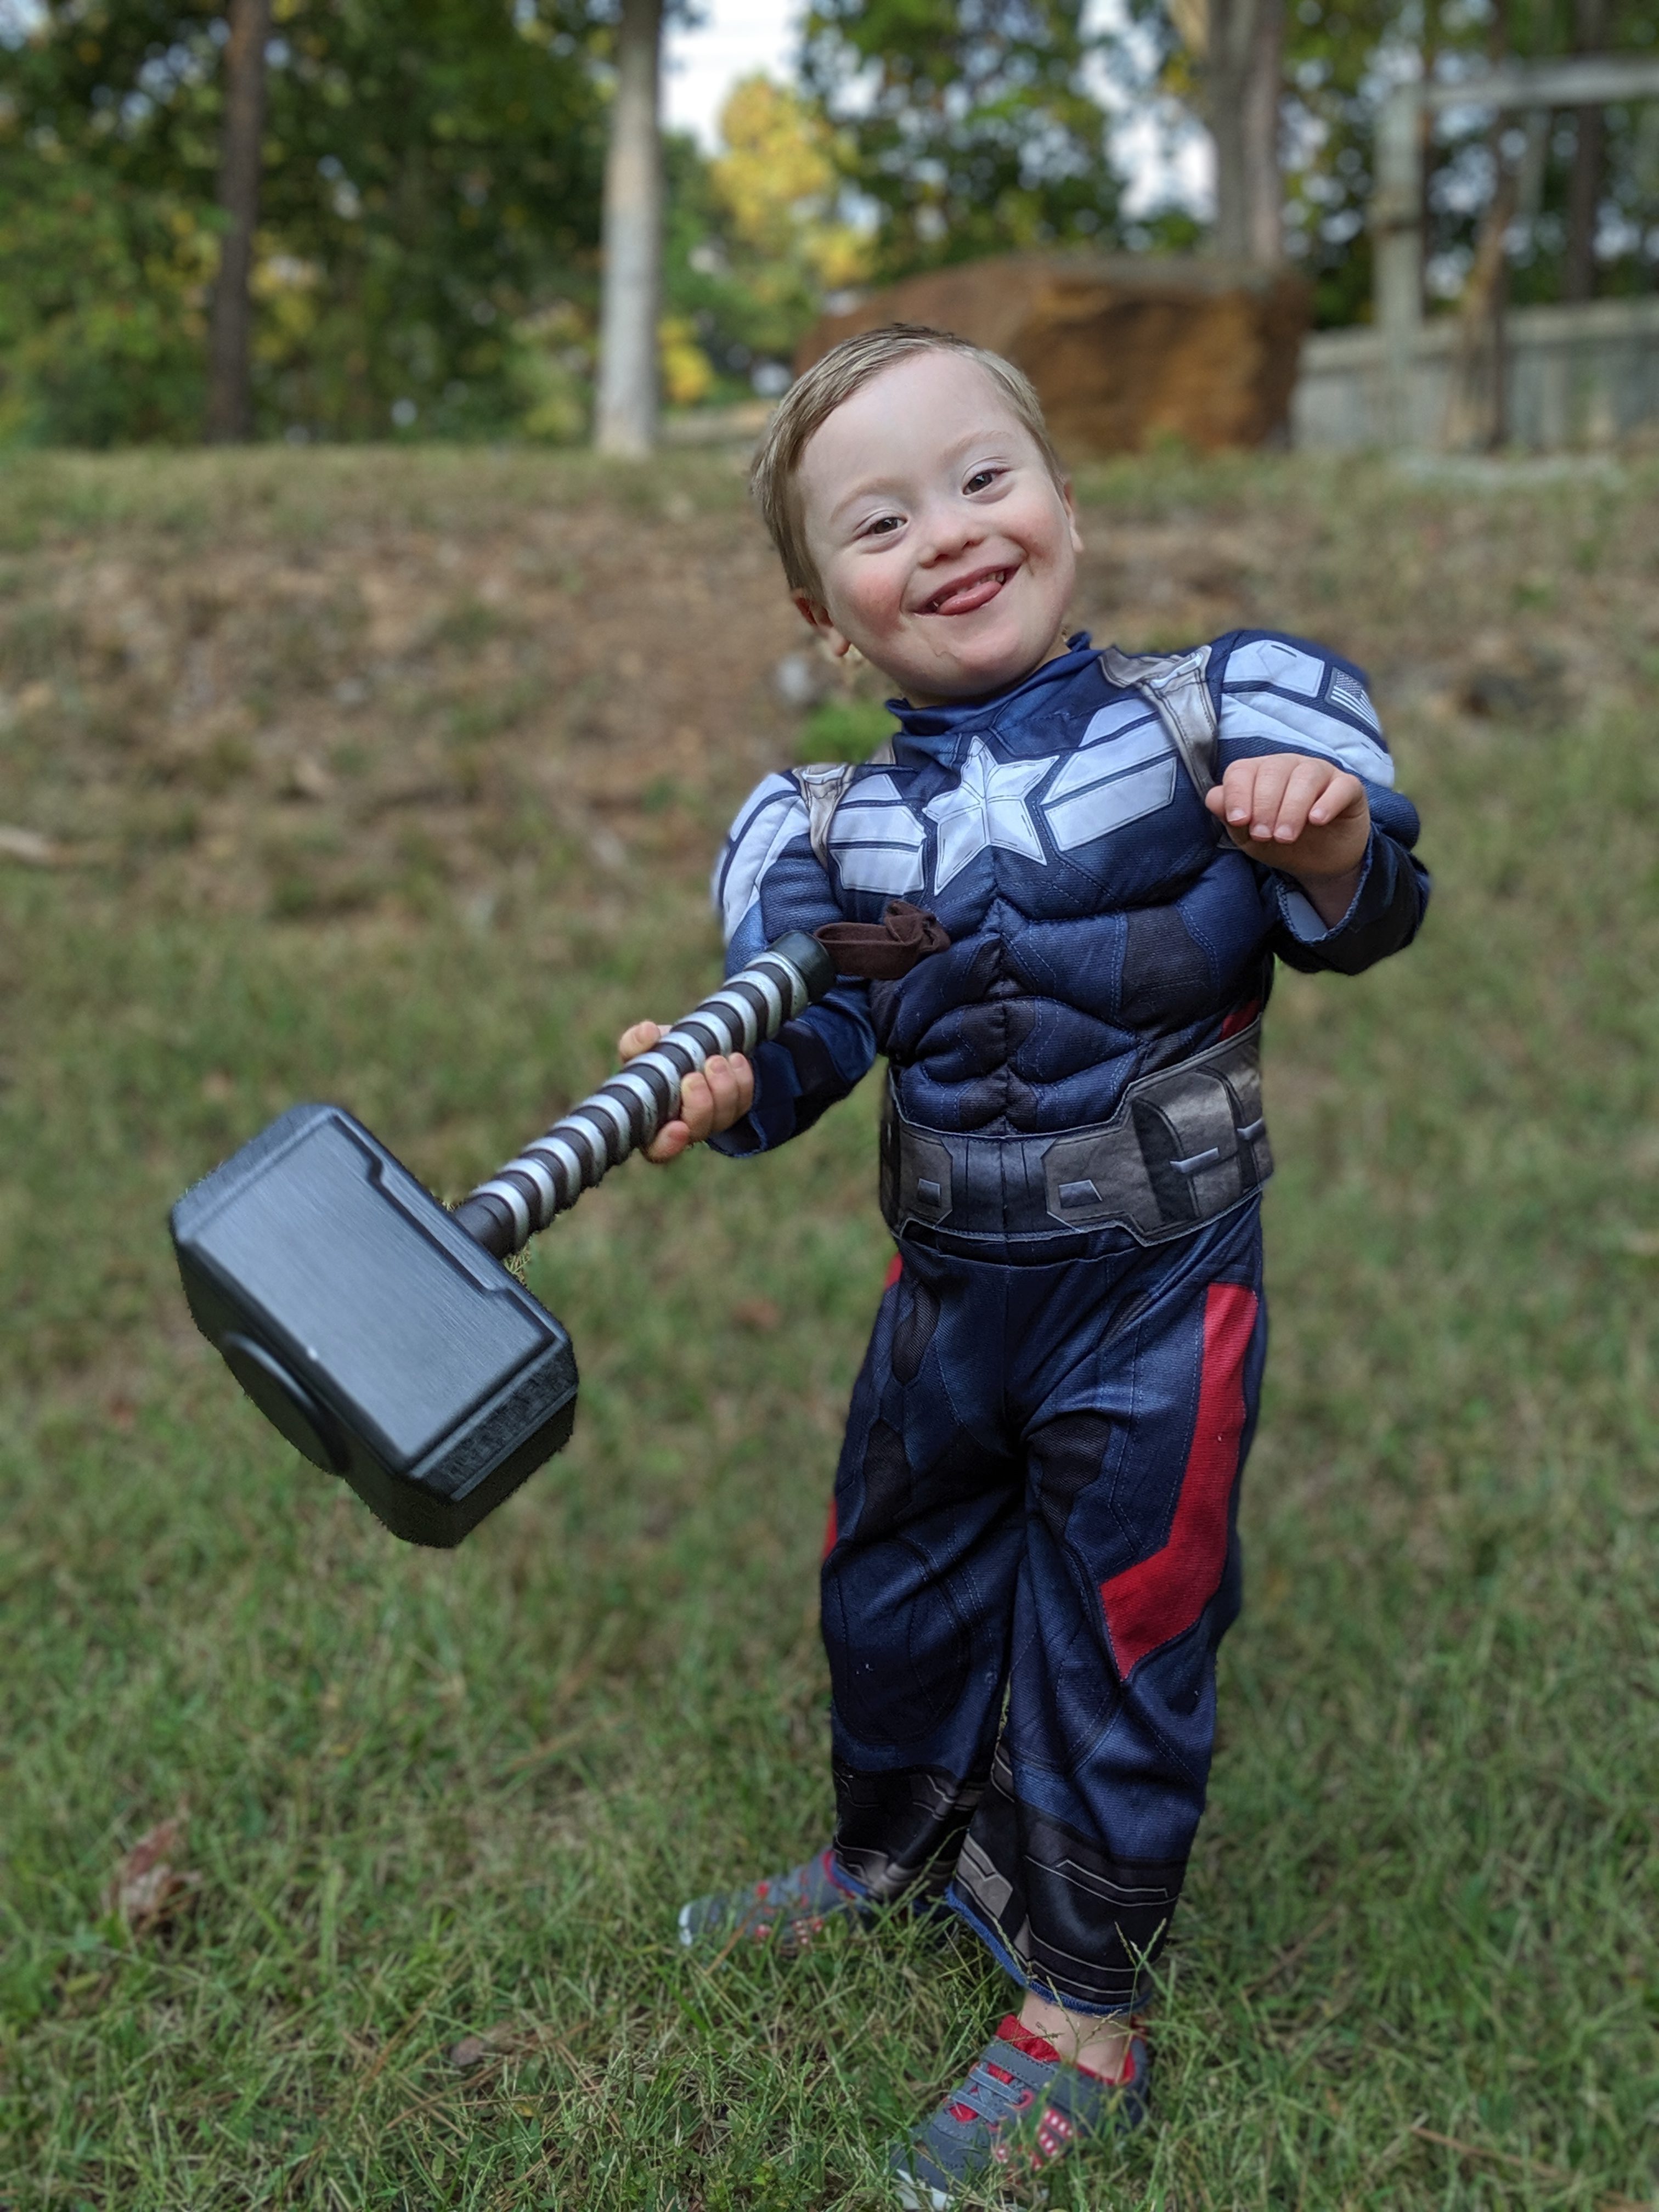 Adam's son who has Down syndrome dressed as Captain America holding Thor's hammer.